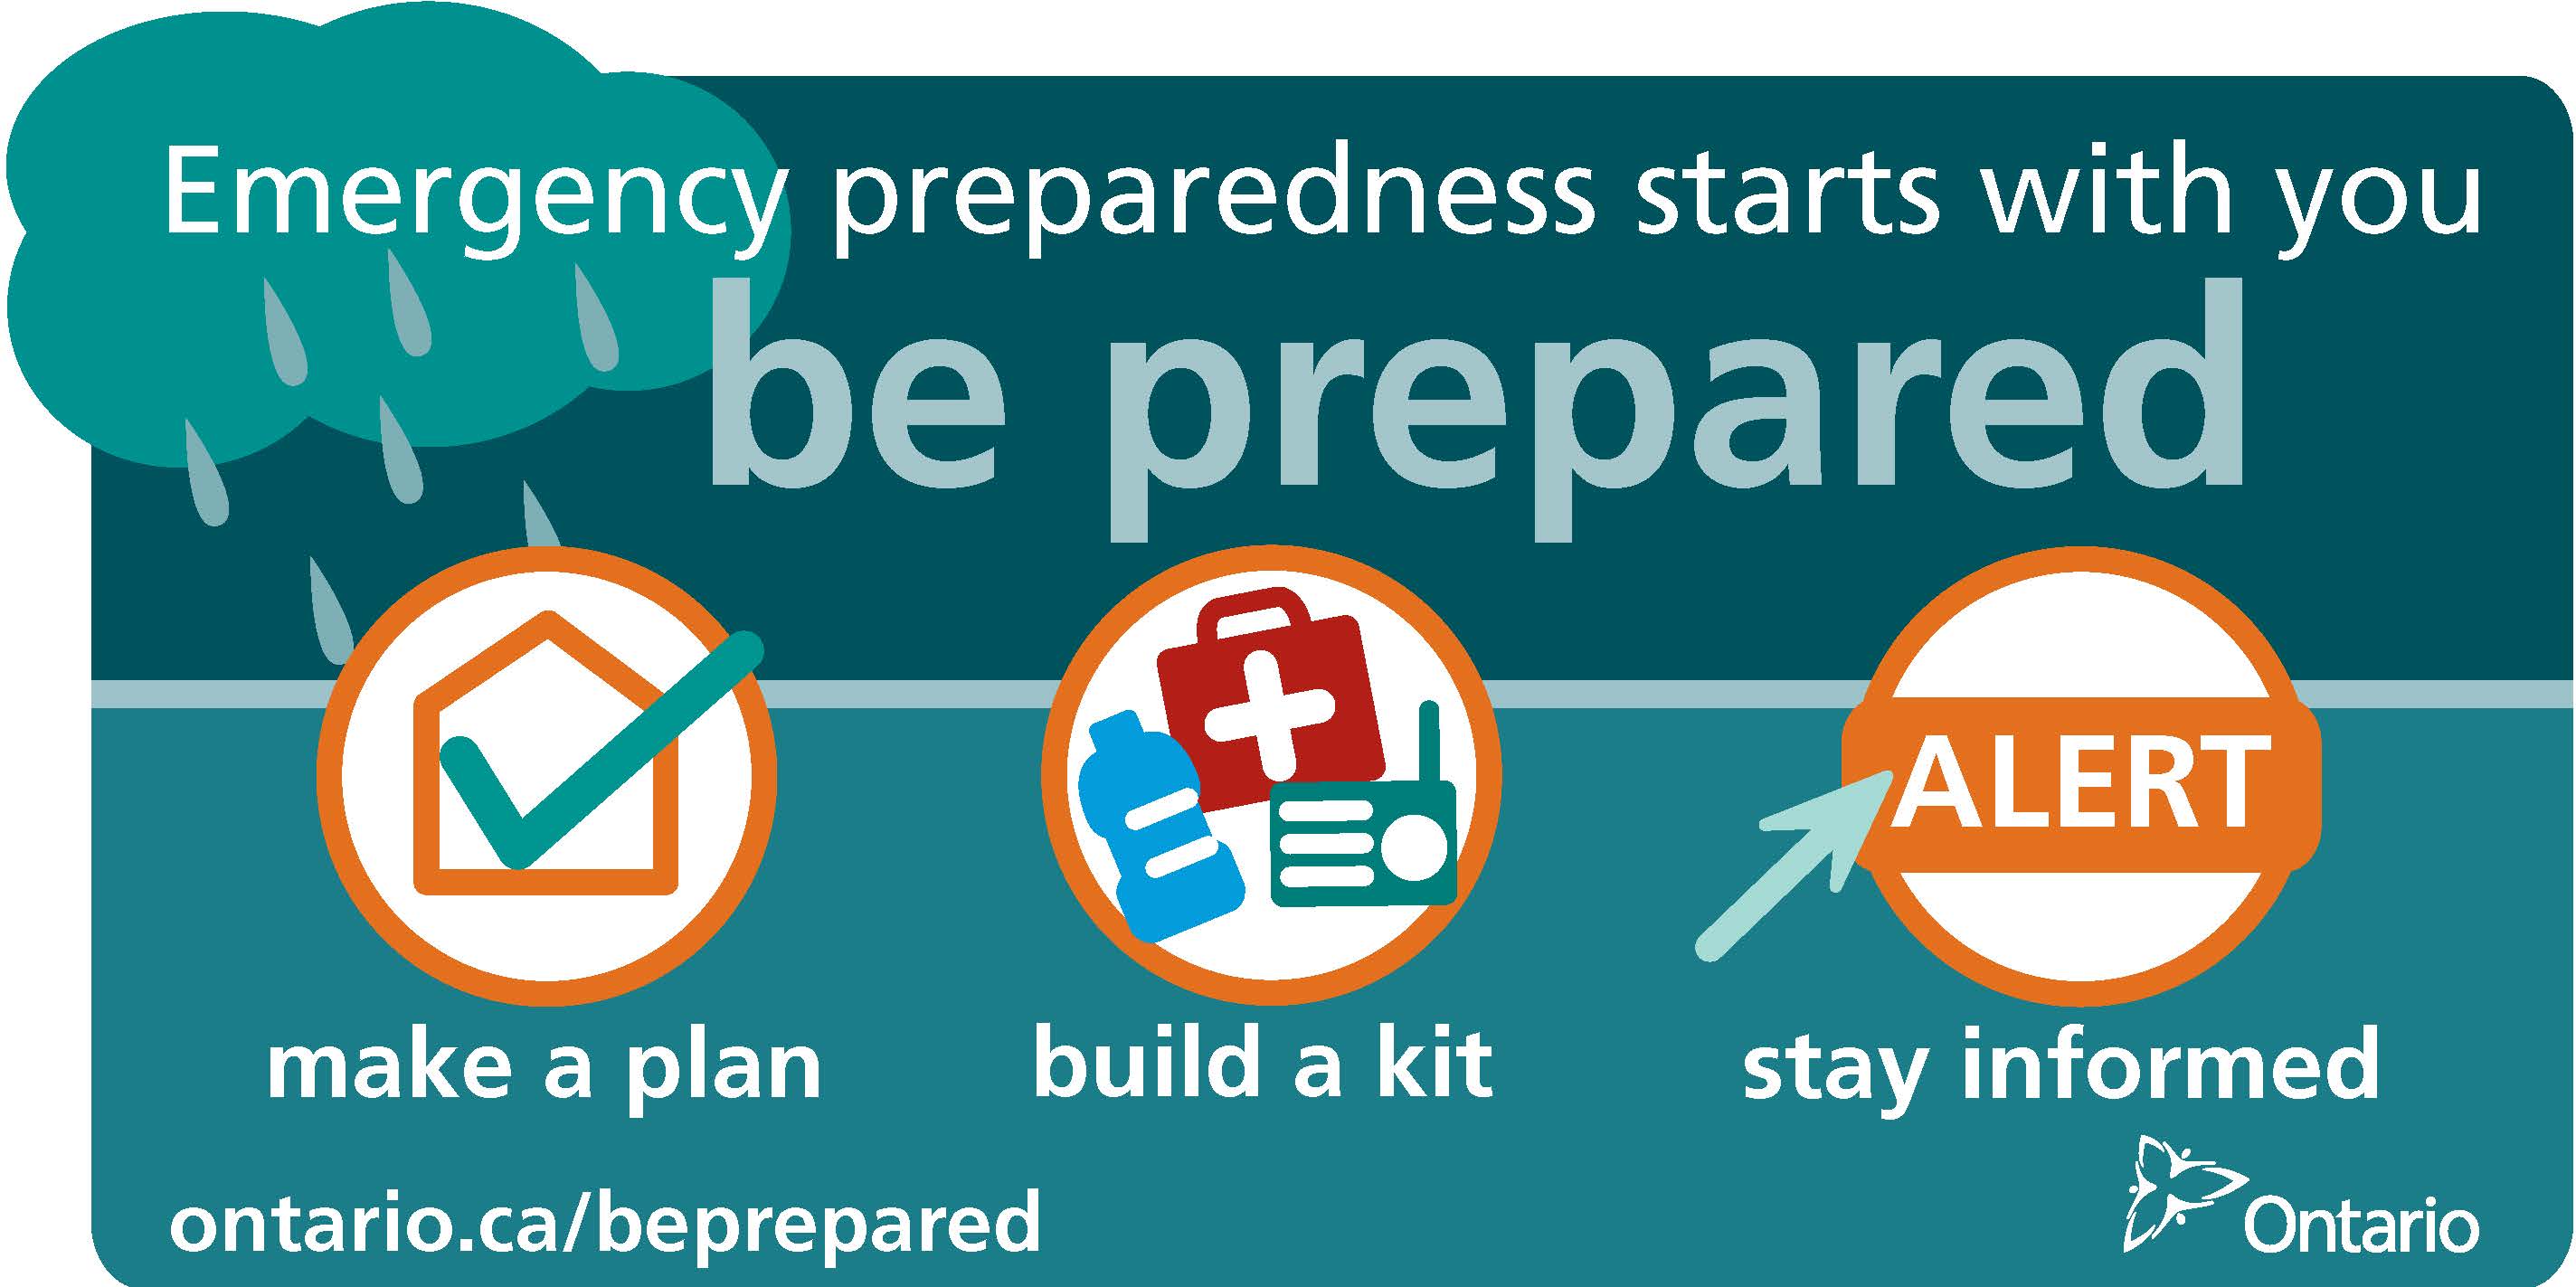 emergency preparedness banner saying make a plan, build a kit and stay informed